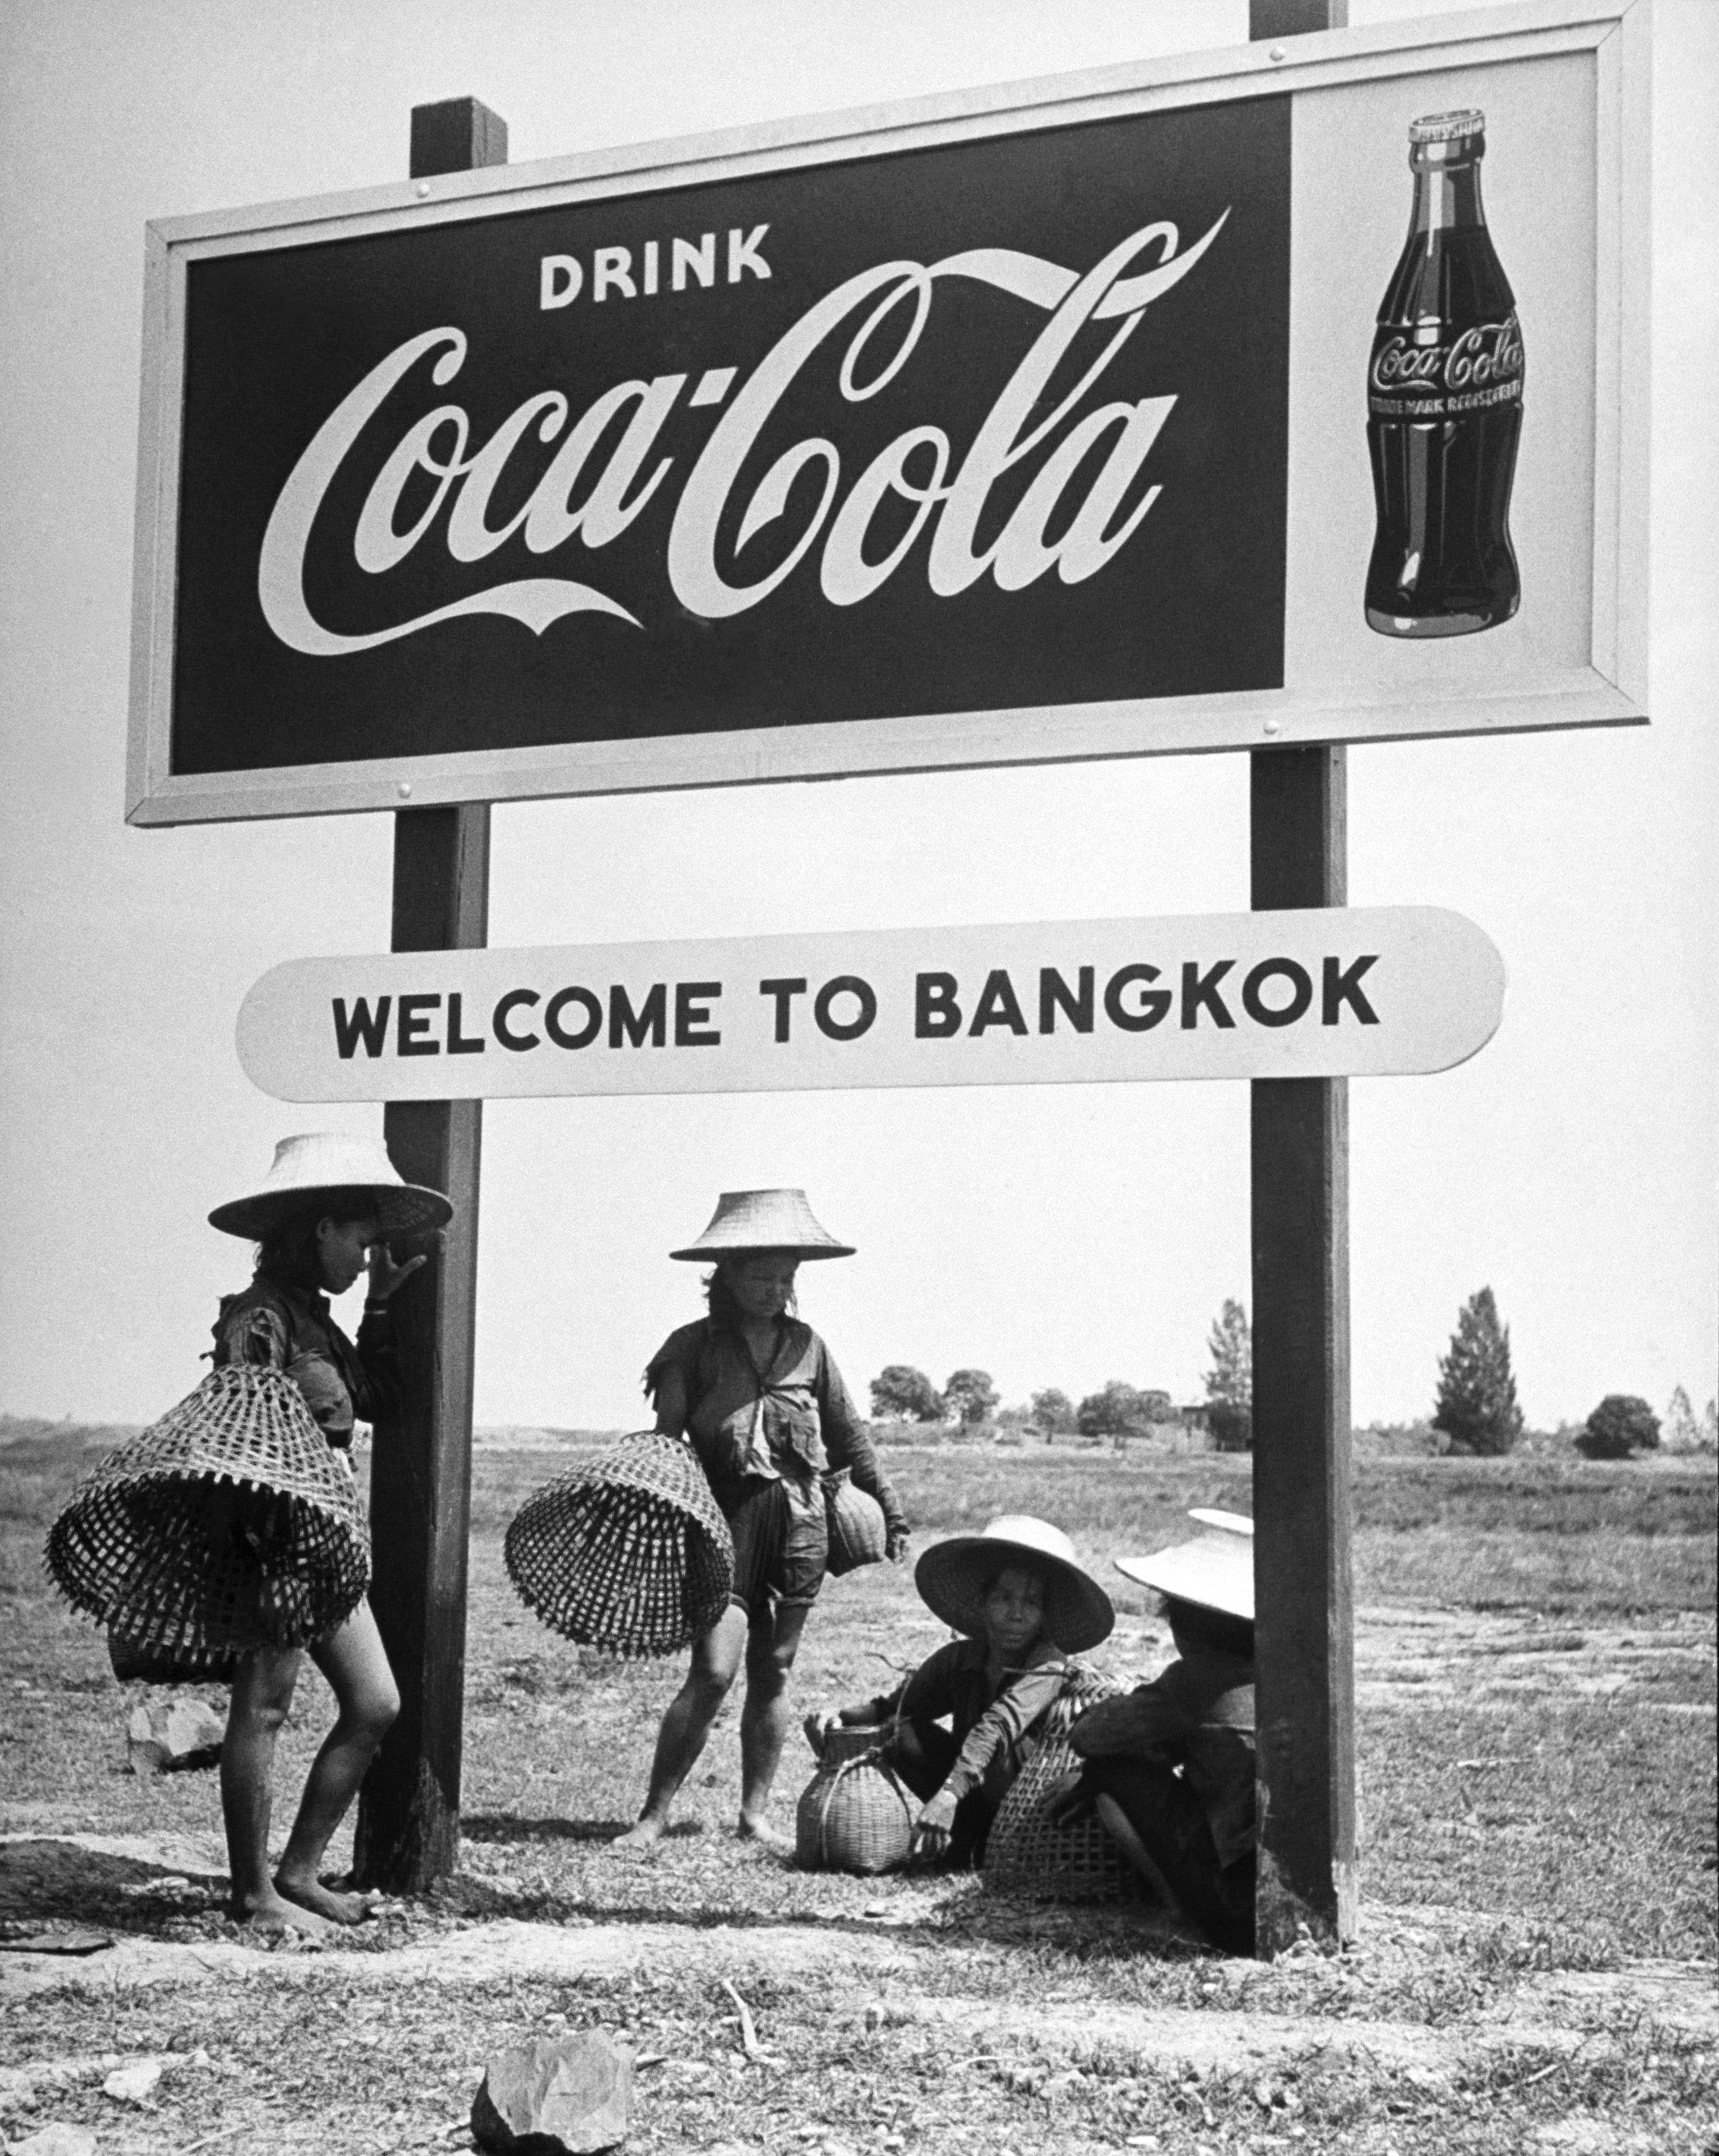 A Thai billboard makes a suggestion in 1950.